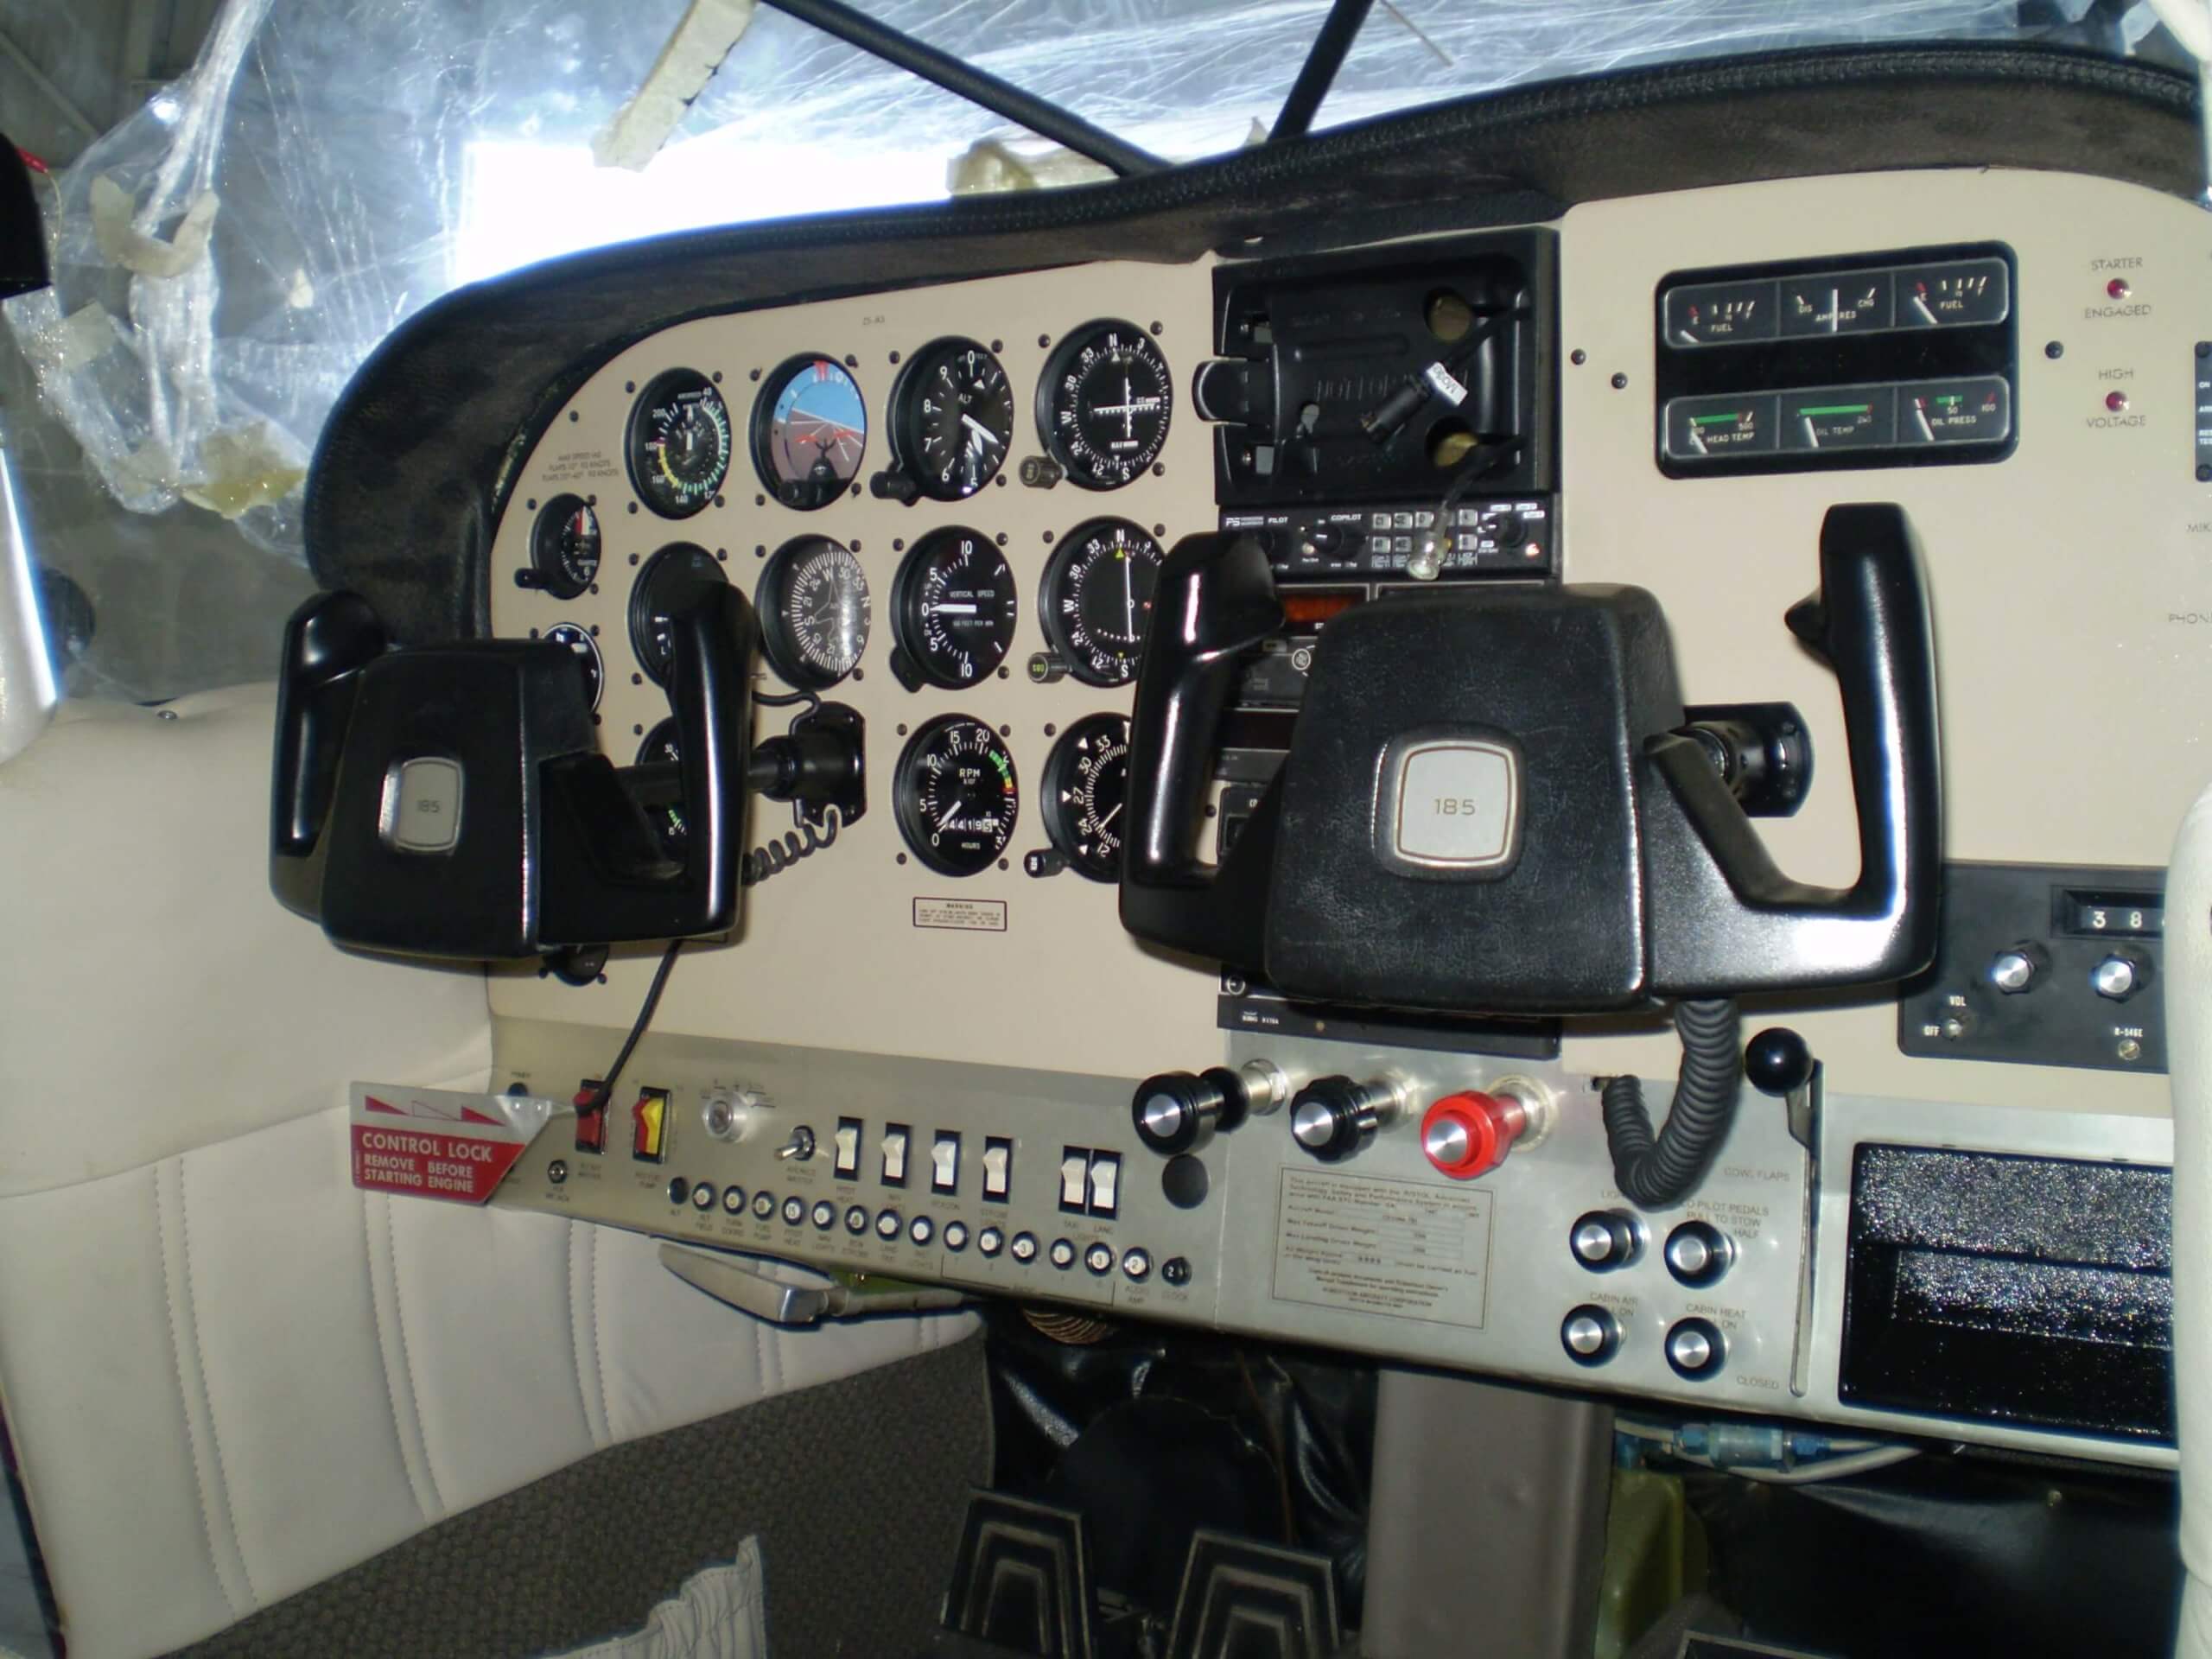 Carry out panel refurbishment to a Cessna 185.